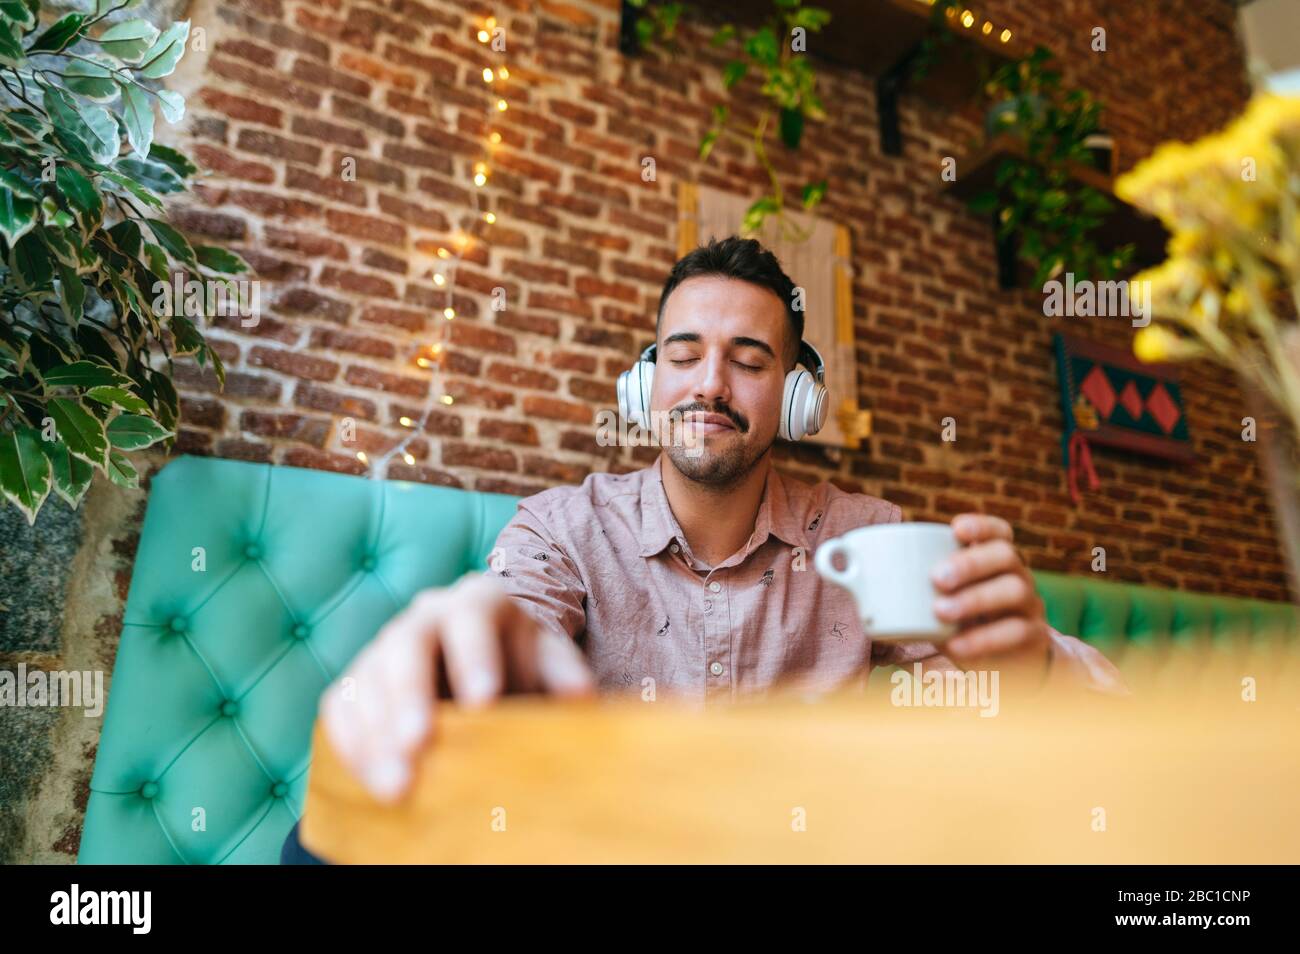 Smiling man with eyes closed in a cafe listening to music with headphones Stock Photo